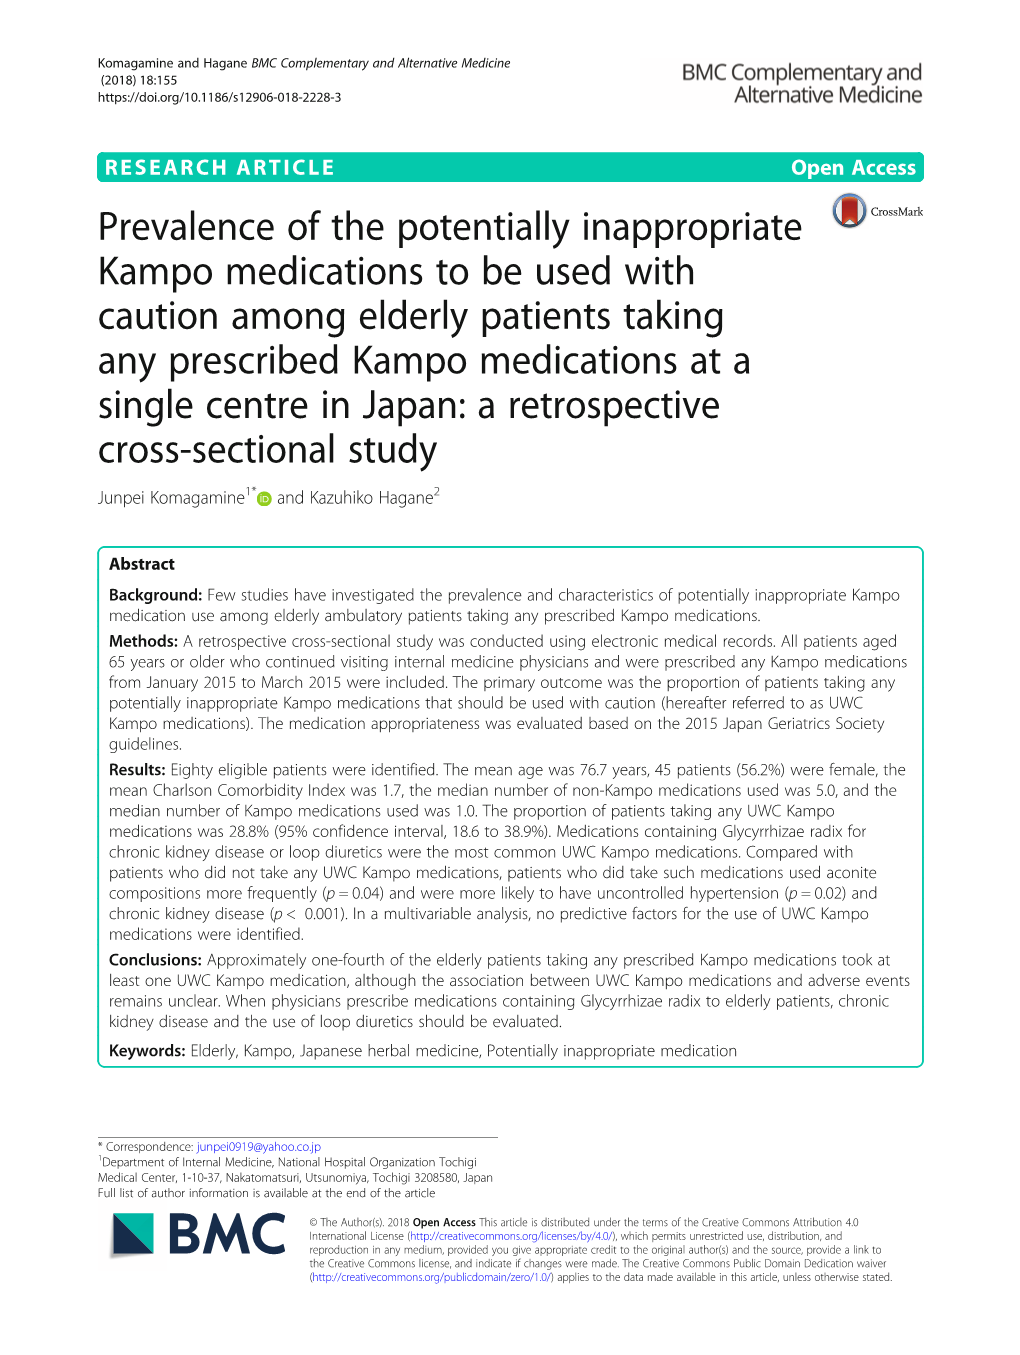 Prevalence of the Potentially Inappropriate Kampo Medications